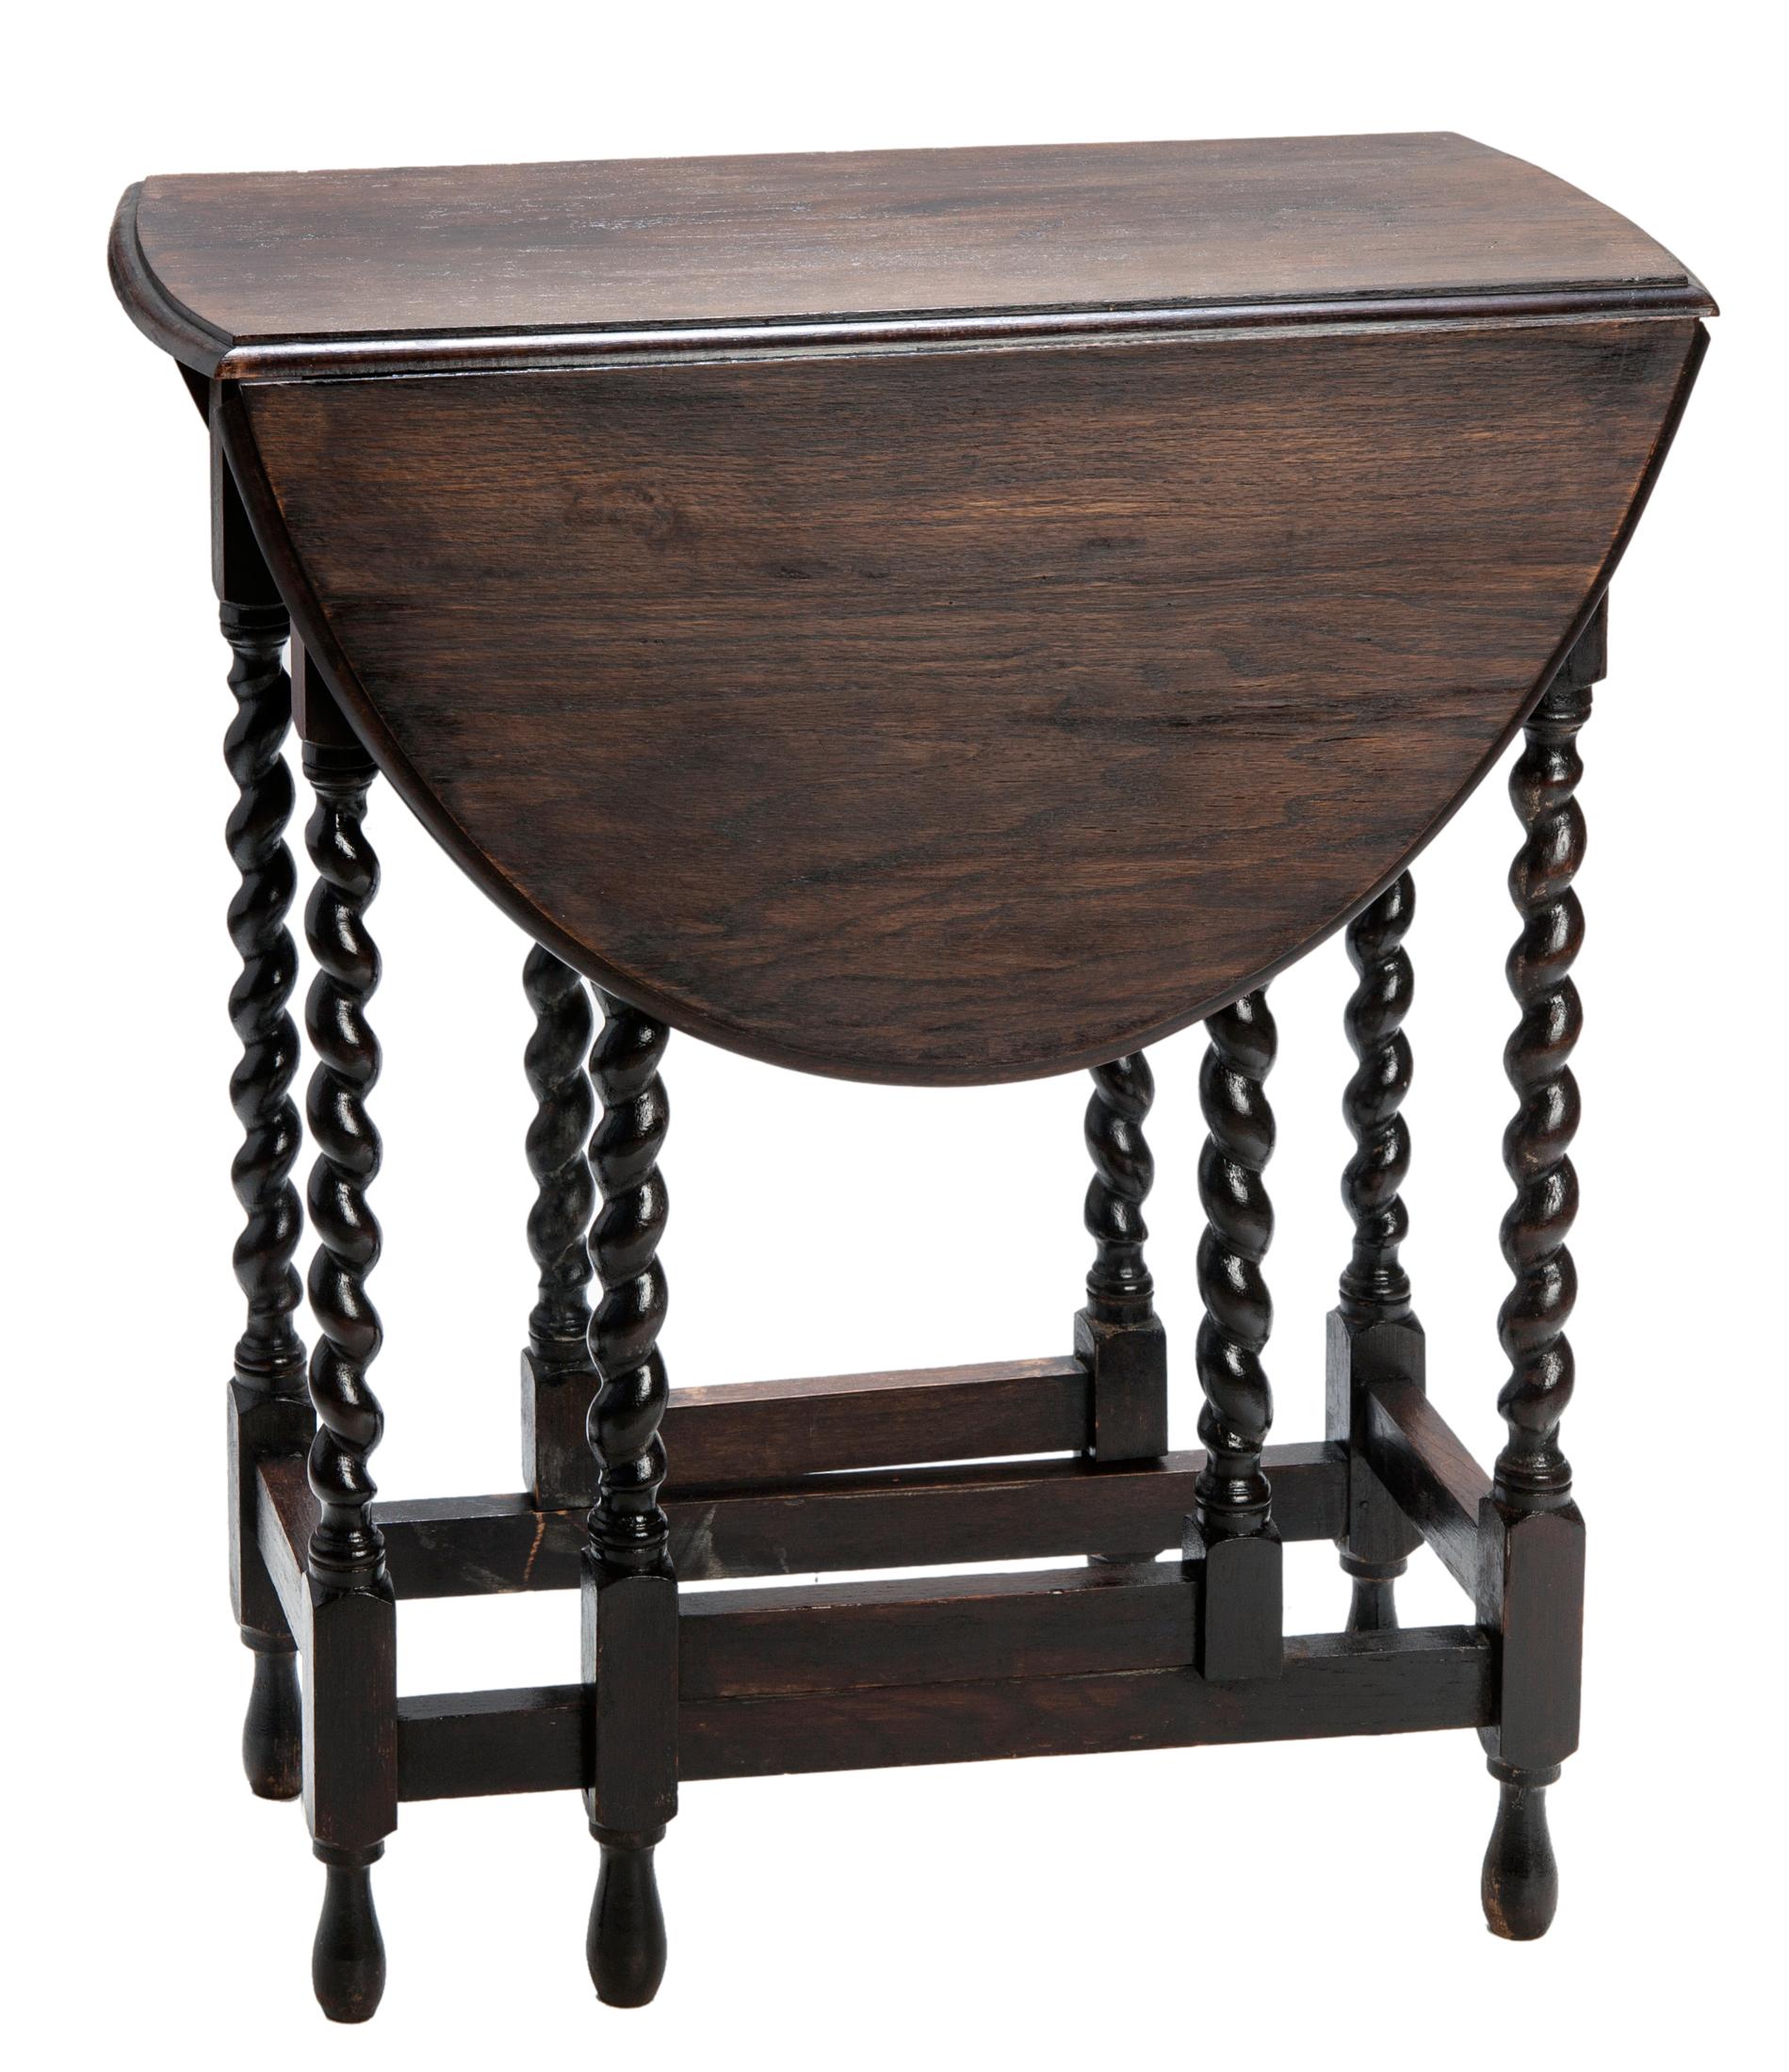 Small tuck-a-way oval drop leaf Oak table with fine barleycorn gate legs.
Slender narrow profile opens to a tapered oval. 
Professionally restored with a dark brown stained finish.